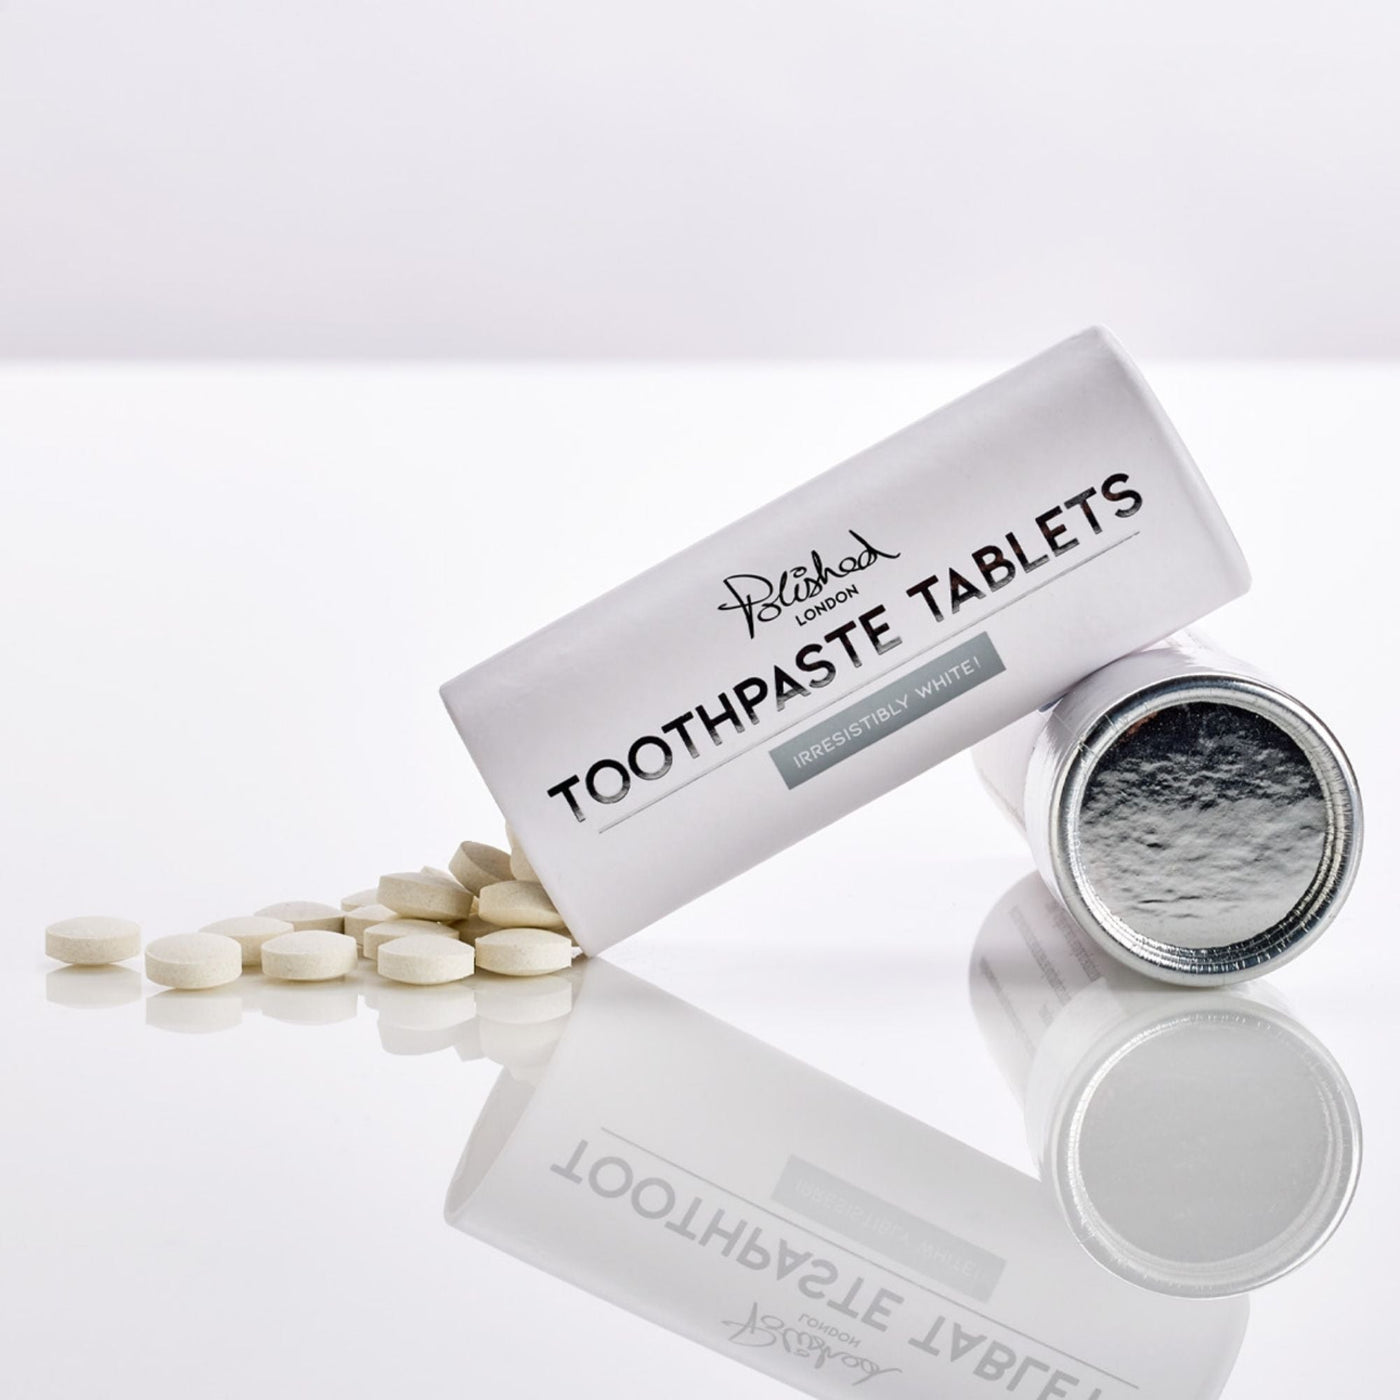 Polished London - Toothpaste Tablets